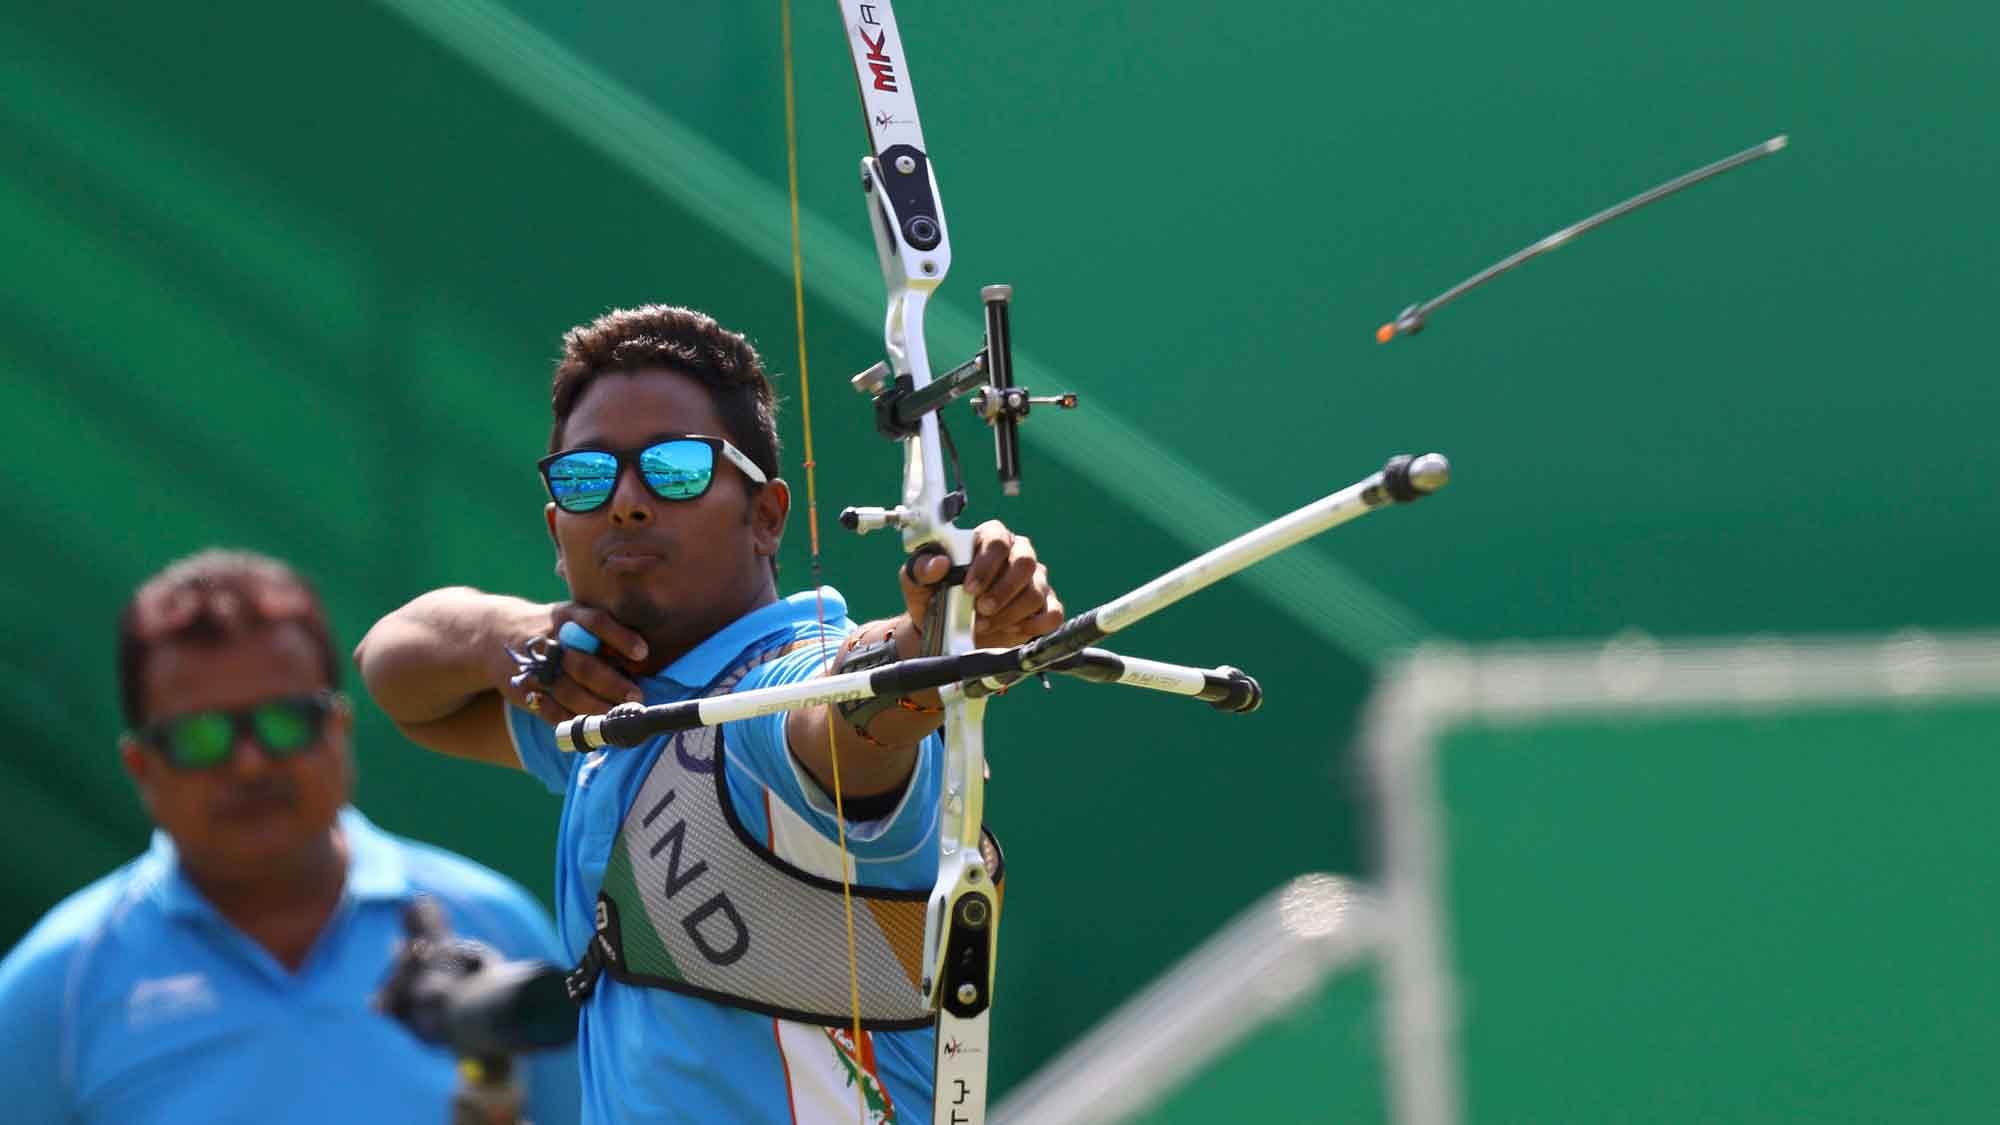 Indian men’s recurve archery team secured the Olympic quota for the 2020 Tokyo Games by storming into the quarterfinals of the World Championships.